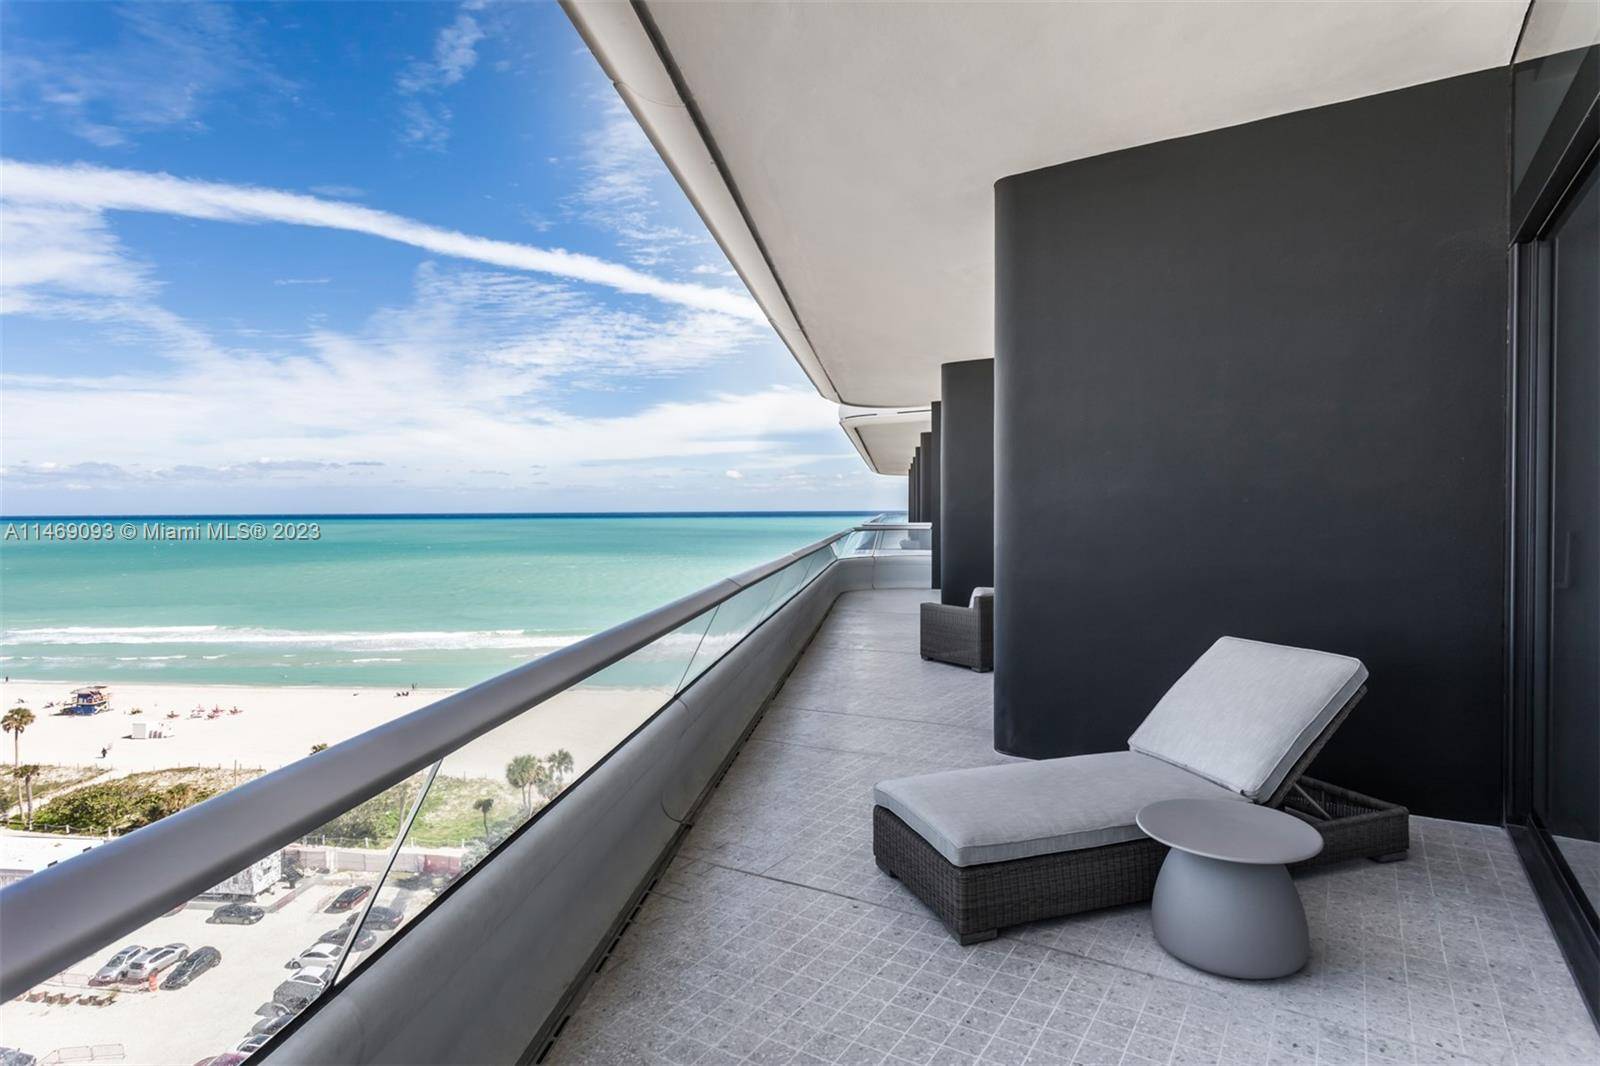 Faena House designed by Foster Partners, is a boutique building offering ultimate in indoor outdoor living.